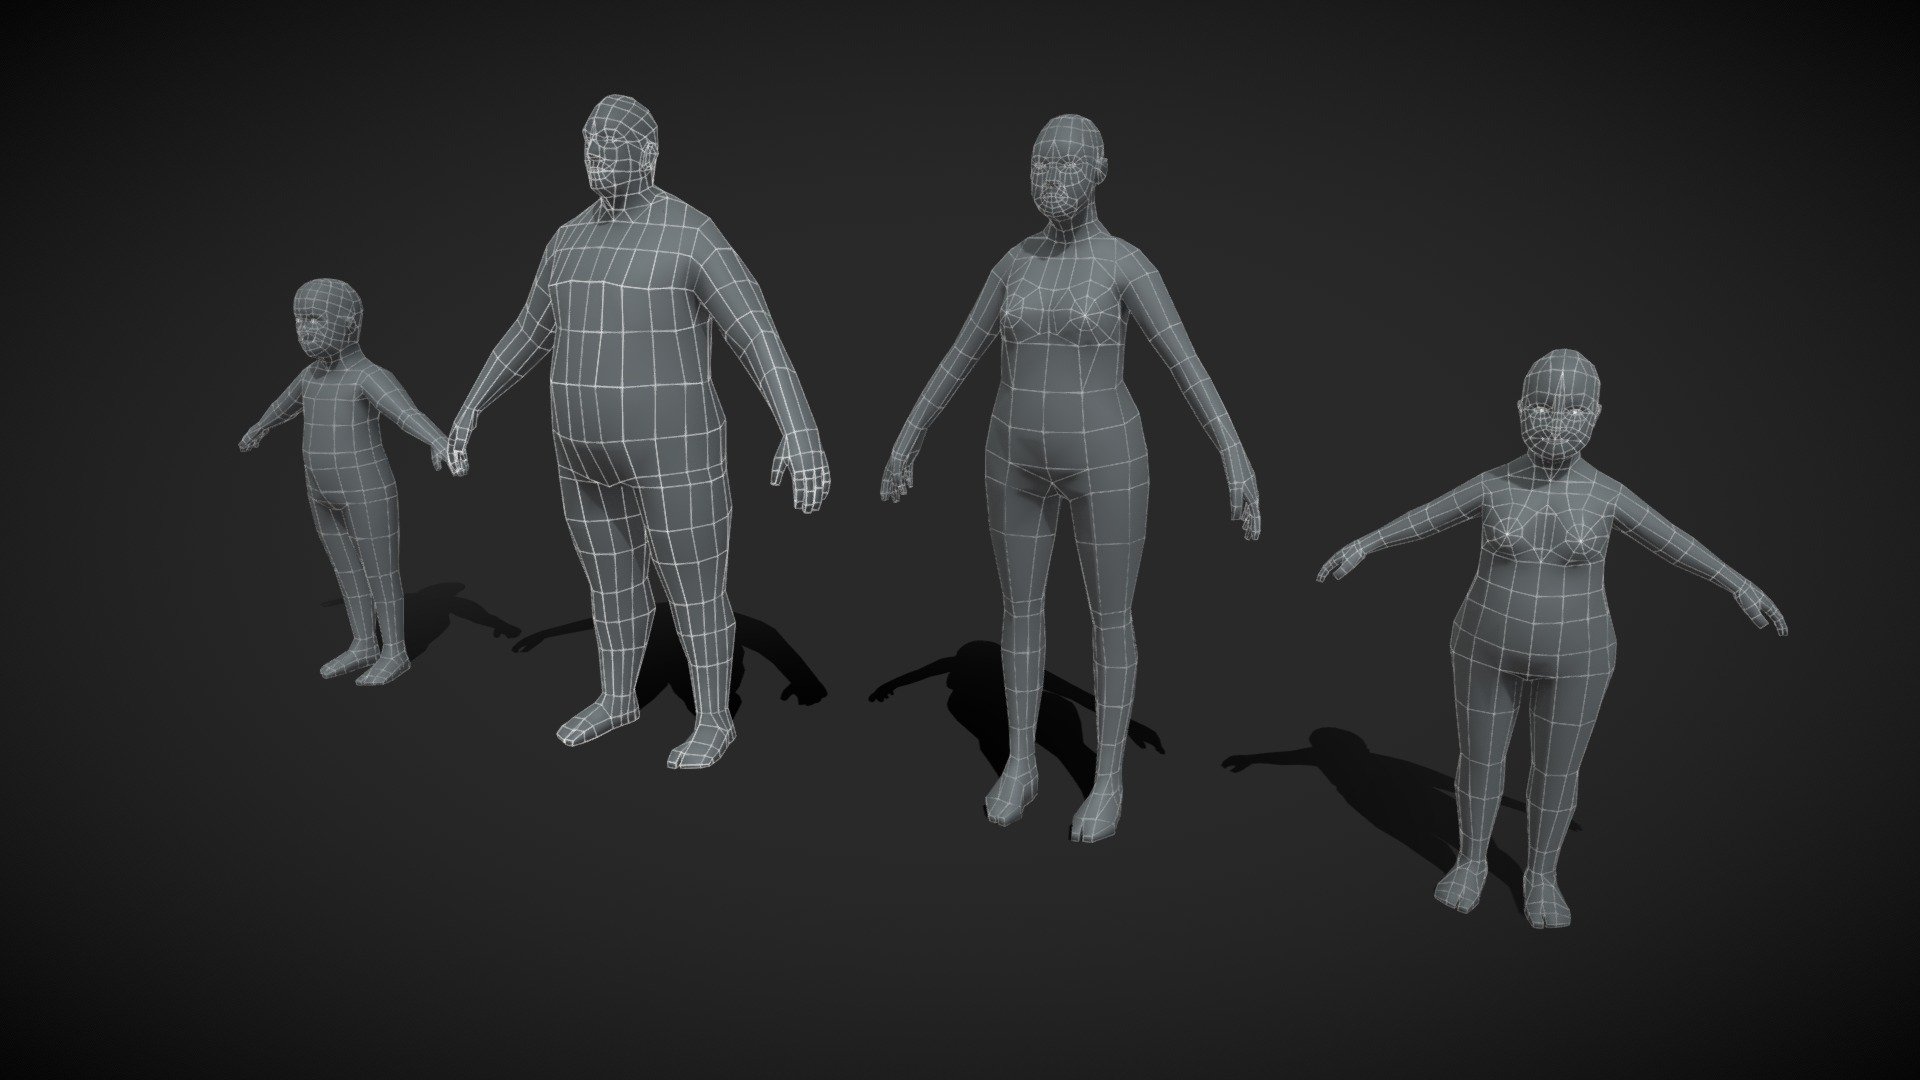 Fat Body Base Mesh 3D Model Family 1000 Polygons consists of 4 base mesh models:




Male Body Fat Base Mesh 3D Model 1000 Polygons - 1054 Polygons, 999 Vertices

Female Body Fat Base Mesh 3D Model 1000 Polygons - 1062 Polygons, 992 Vertices

Fat Boy Kid Body Base Mesh 3D Model 1000 Polygons - 954 Polygons, 919 Vertices

Fat Girl Kid Body Base Mesh 3D Model 1000 Polygons - 1066 Polygons, 1010 Vertices

You can buy any of them as a single model, or save 25% if you buy this pack.

All models are completely ready to be used as a starting point to develop your characters. Good topology ready for animation.

Technical details:




File formats included in the package are: FBX, OBJ, GLB, ABC, DAE, PLY, STL, BLEND, gLTF (generated), USDZ (generated)

Native software file format: BLEND

Blender scene included.
 - Fat Body Base Mesh 3D Model Family 1000 Polygons - Buy Royalty Free 3D model by 3DDisco 3d model